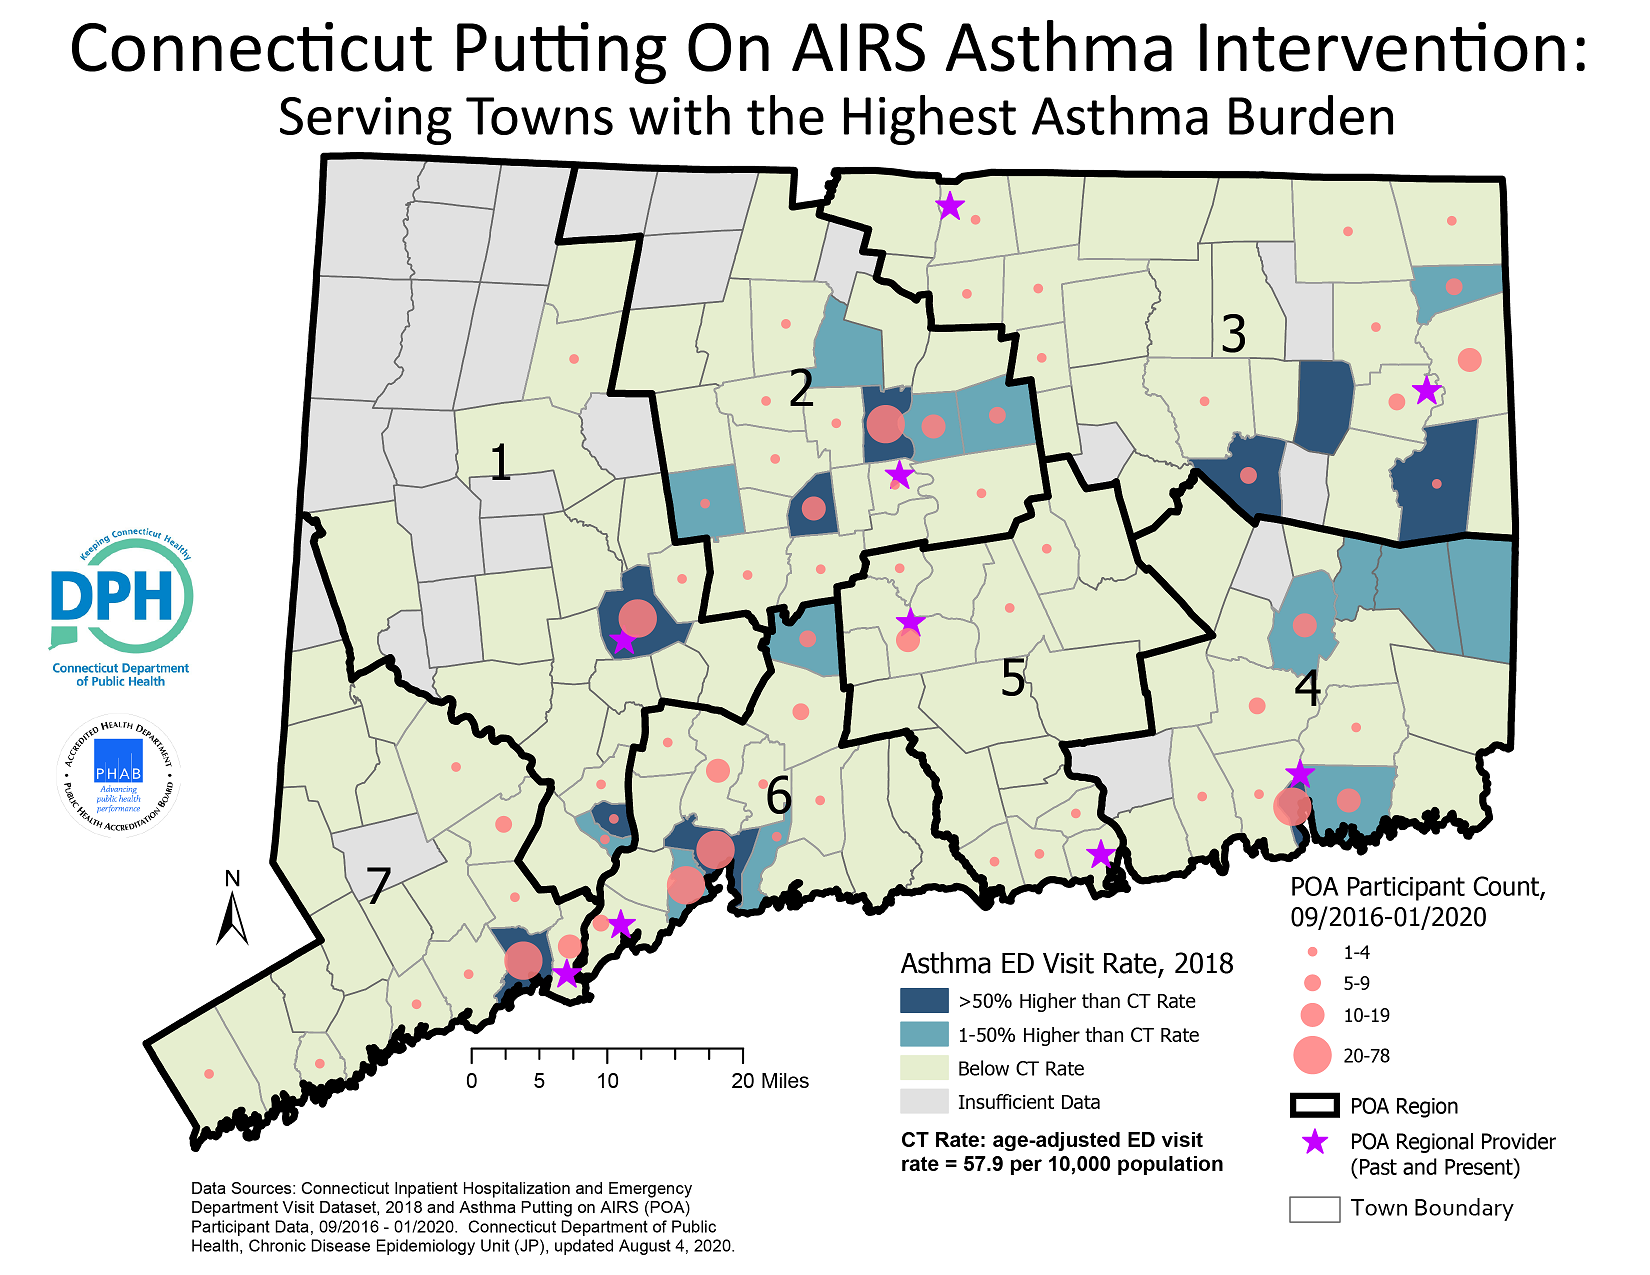 Connecticut Putting On AIRS Asthma Intervention: Serving Towns with the Highest Asthma Burden